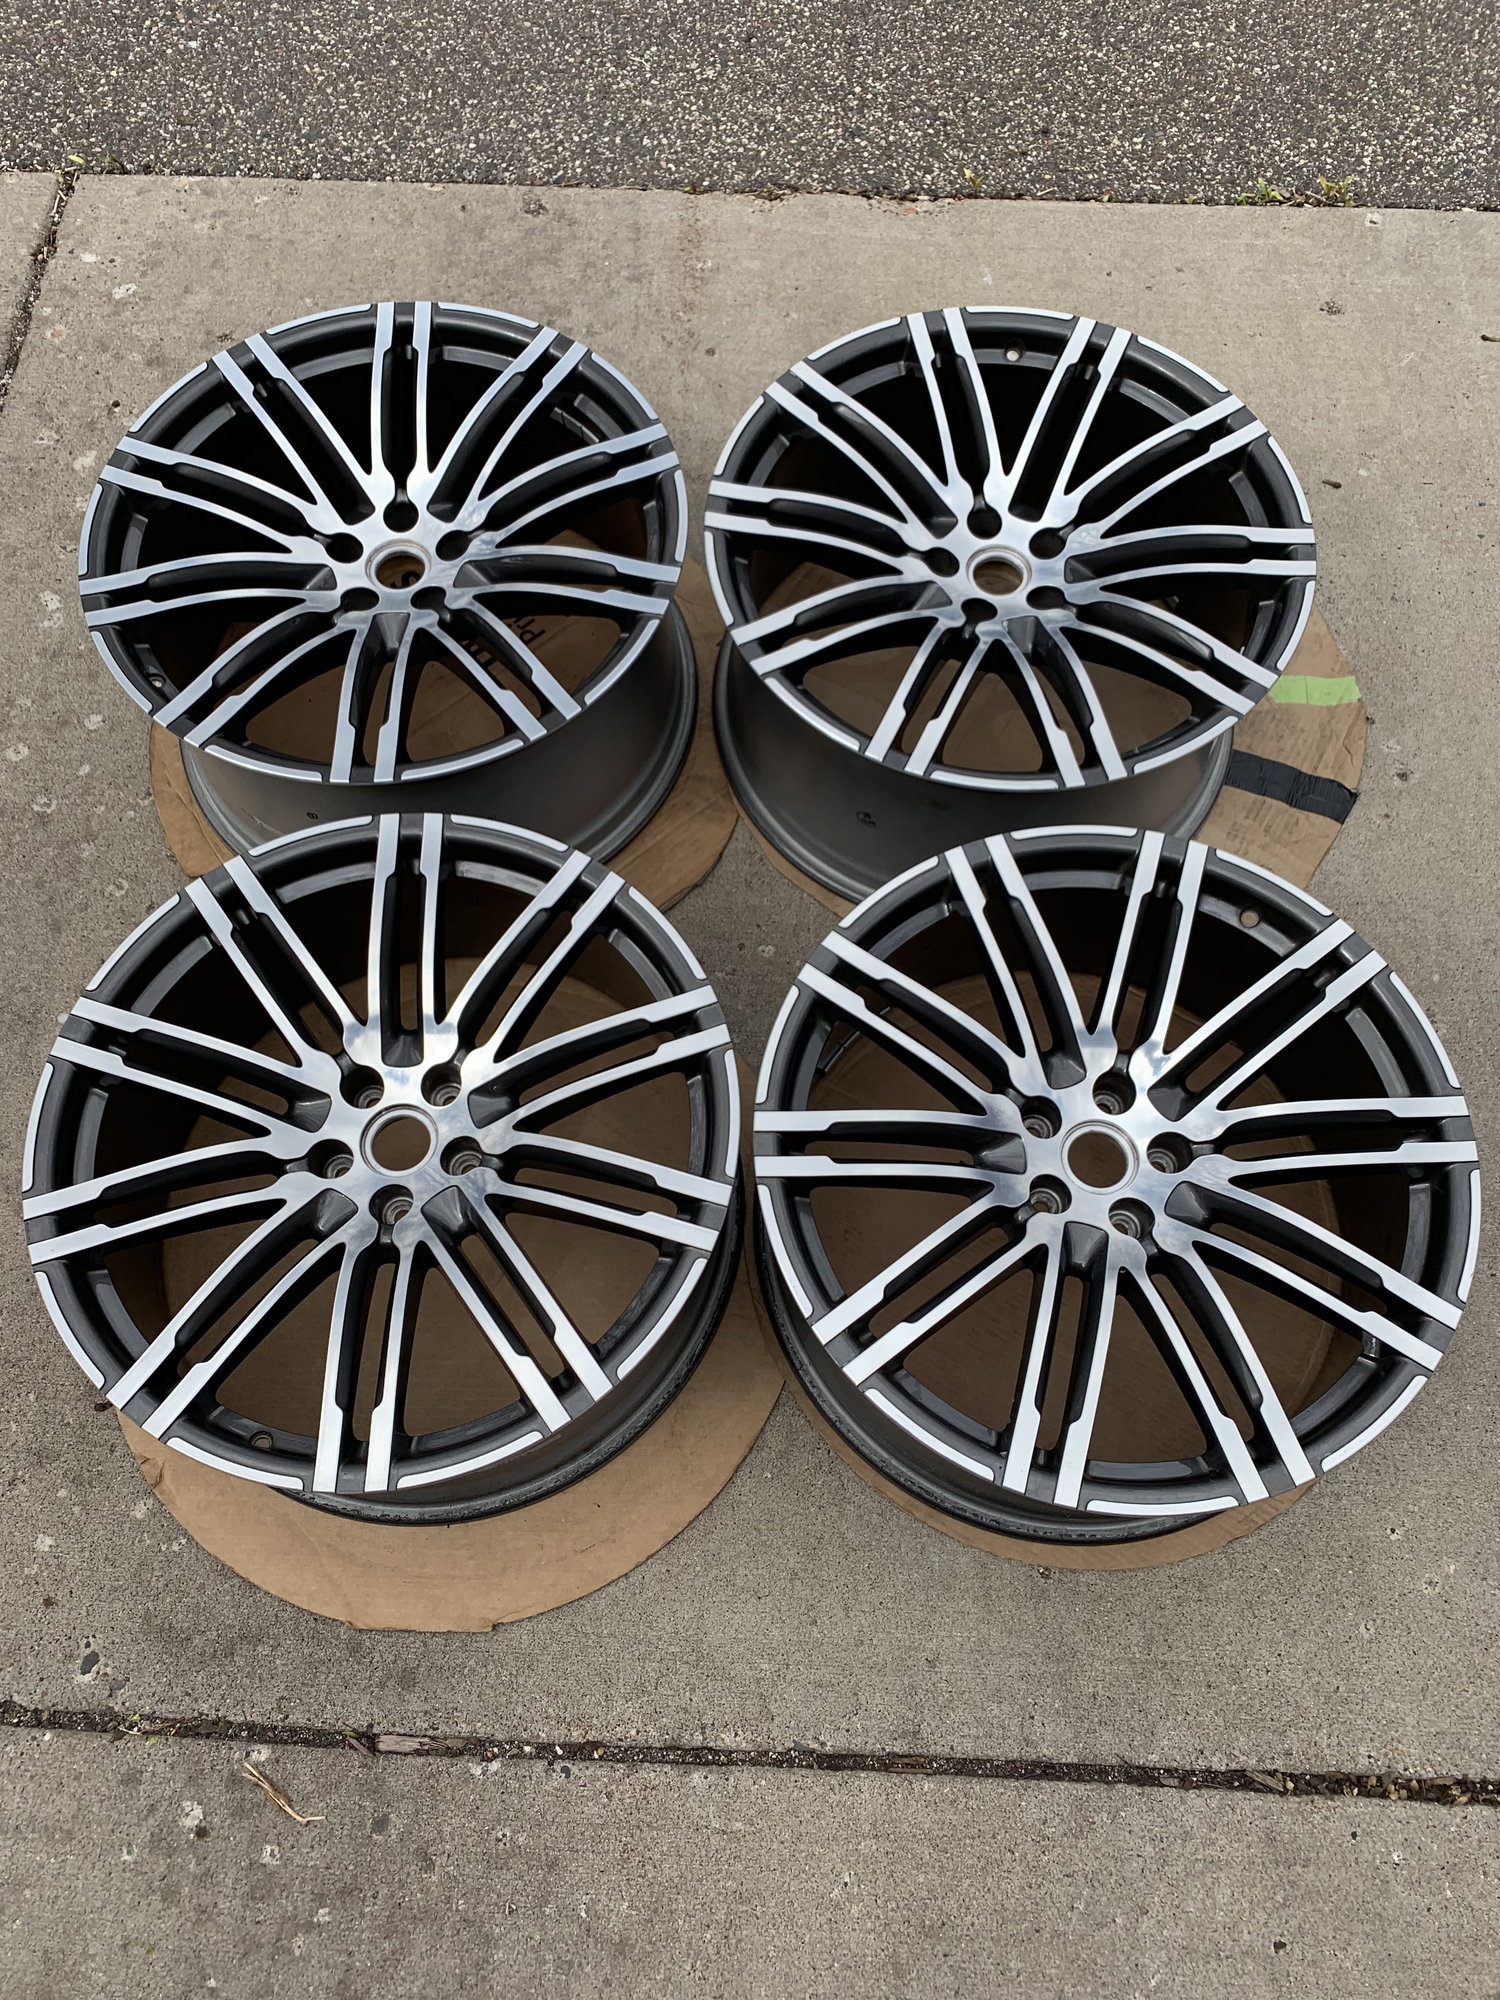 Wheels and Tires/Axles - OEM 21" Porsche Macan Turbo Wheels - Excellent - 95B - Used - 2014 to 2019 Porsche Macan - Chanhassen, MN 55317, United States